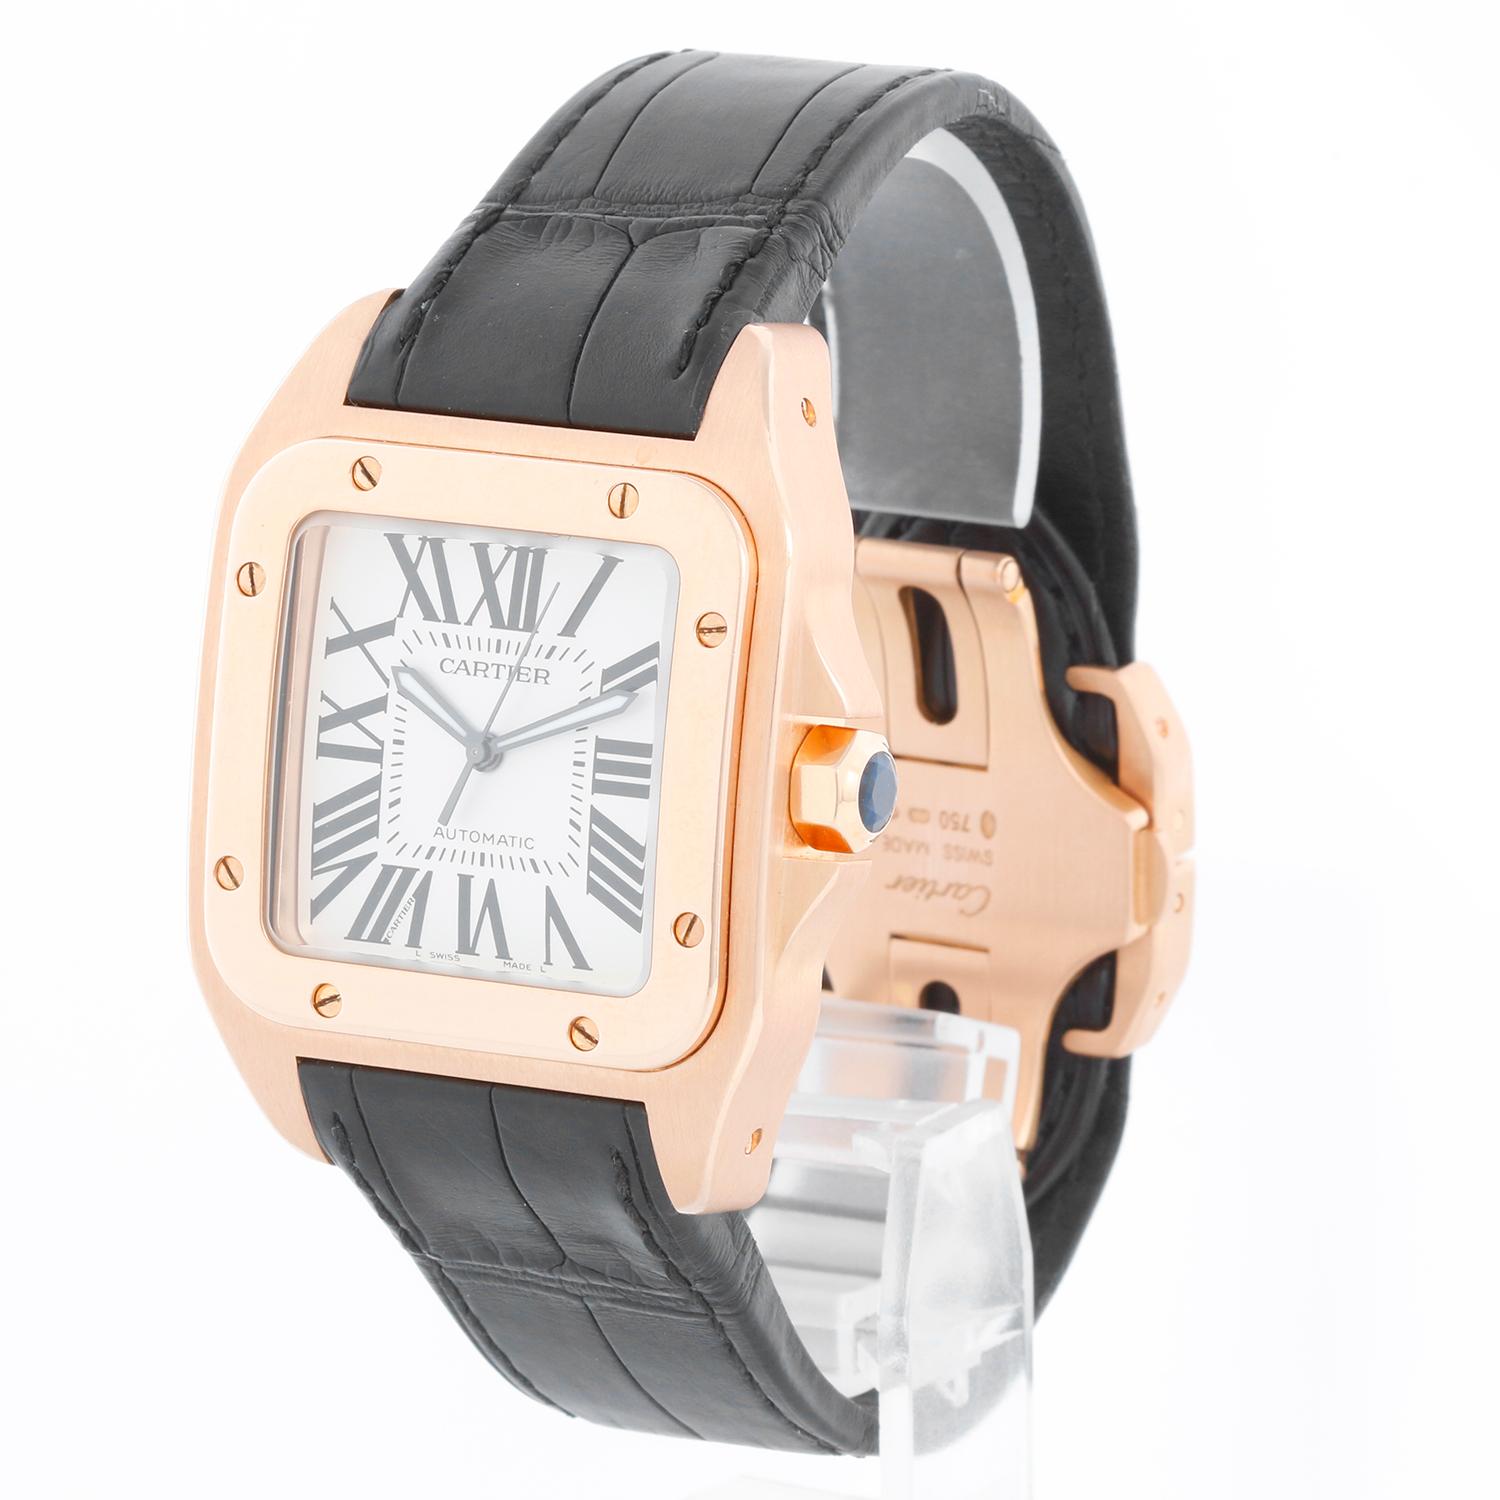 Cartier Santos 100 XL 18K Rose Gold Men's Watch 2792 W20095Y1- Automatic winding. 18K Rose Gold (41mm x 50mm). Silver dial with roman numerals. Black Cartier strap with 18K Rose gold deployant clasp. Pre-owned with Cartier box.